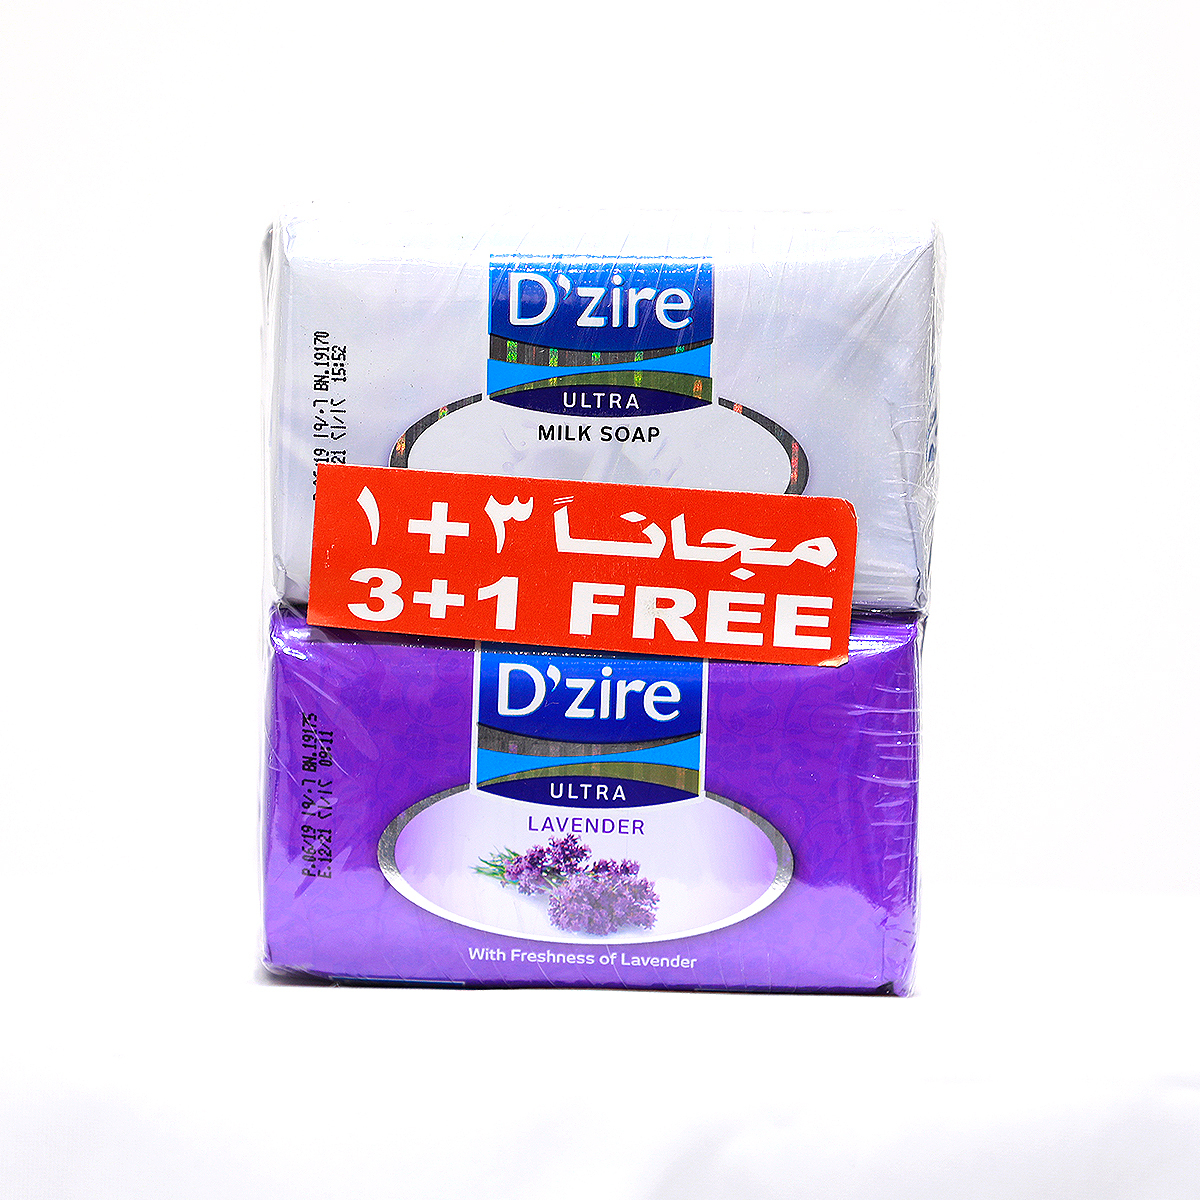 Dzire Soap Assrted 125g 3+1 Fre